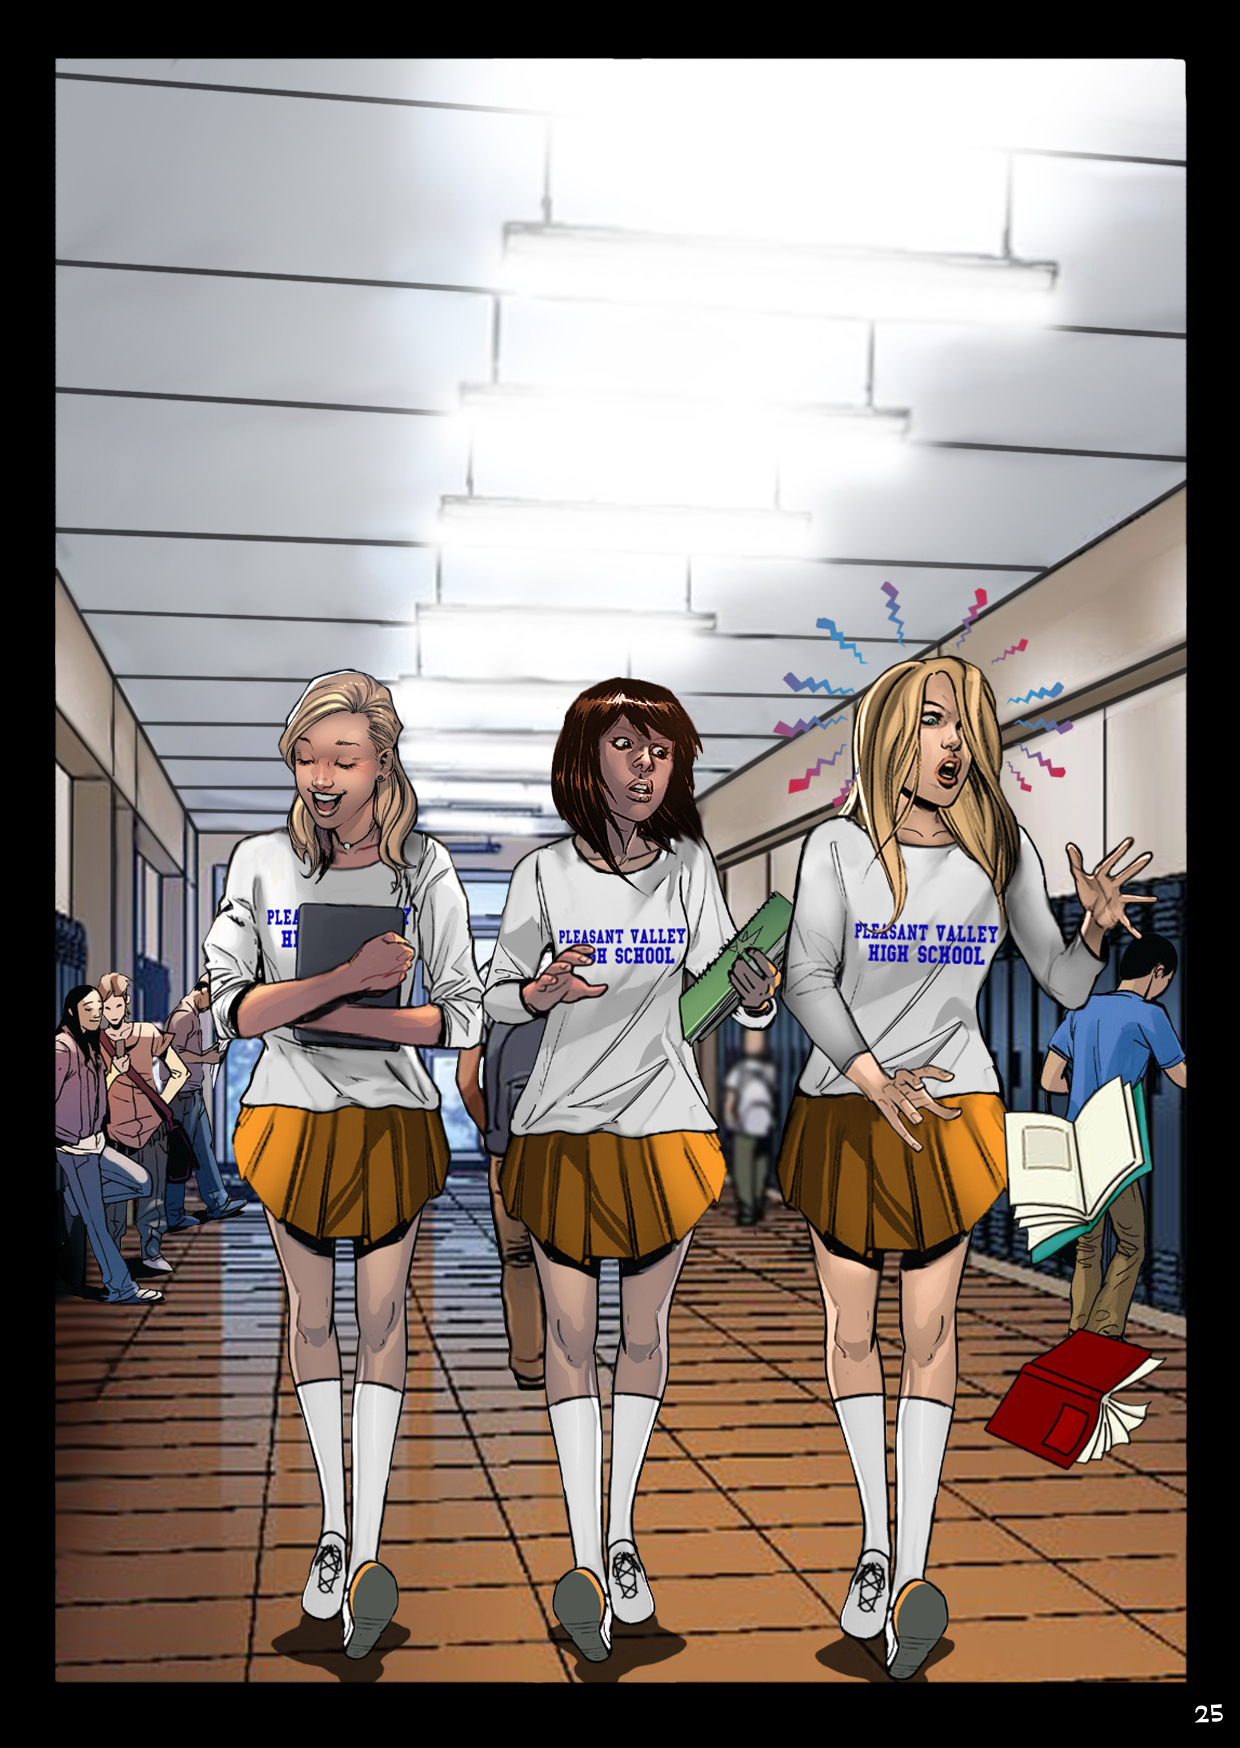 Walking down the hall with her cheerleader friends, Pamela is so struck by something that she suddenly drops her schoolbooks.